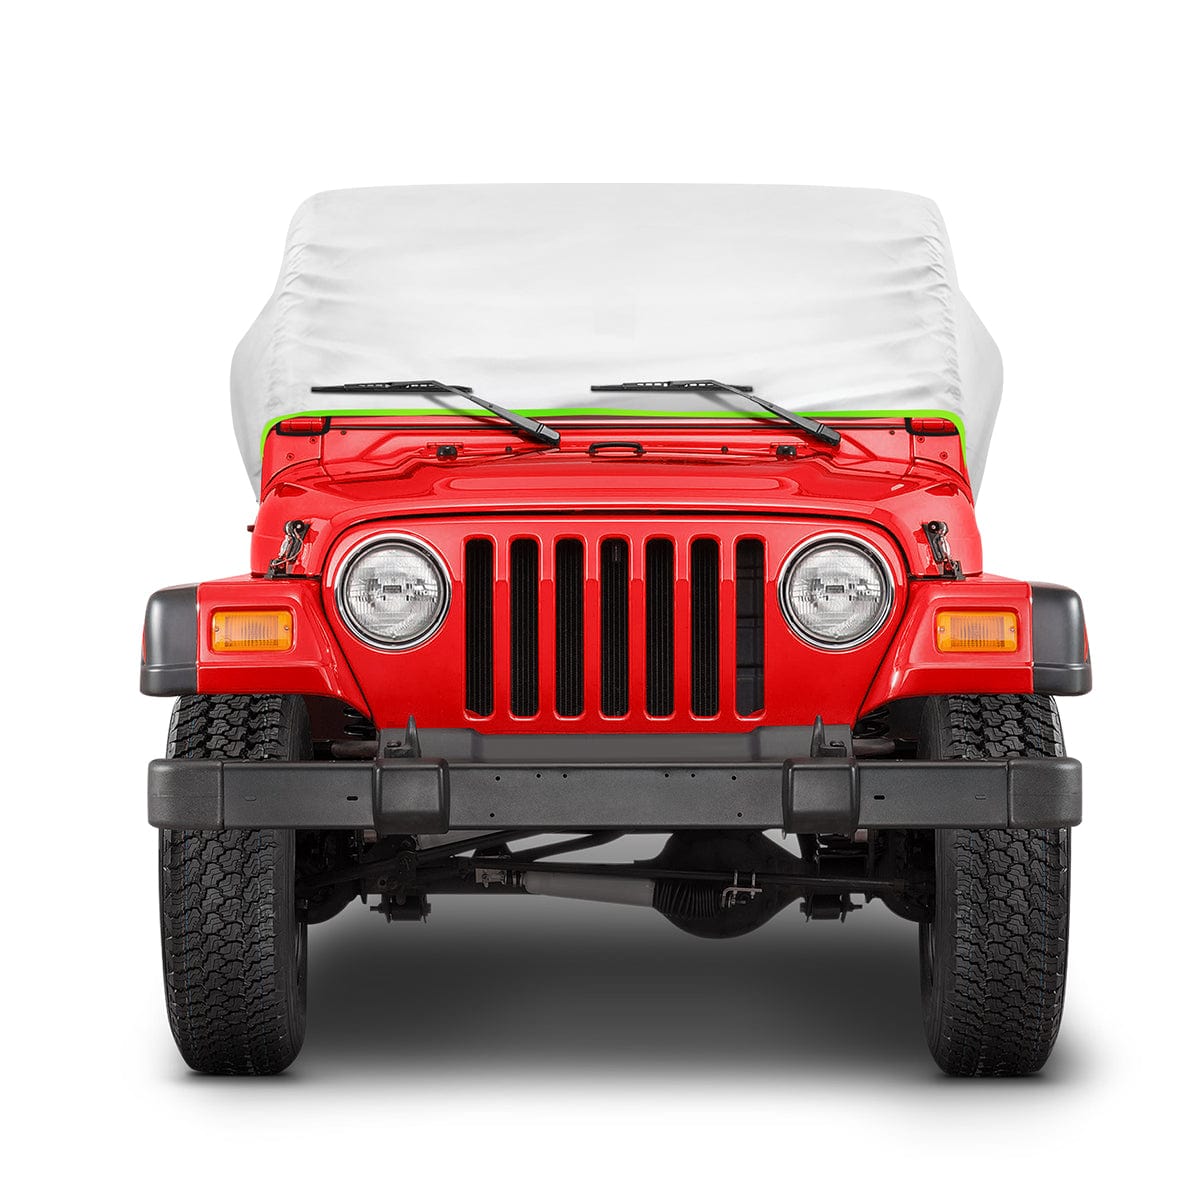 SUPAREE Jeep Cover Suparee Jeep Cab Cover Waterproof for 1976-2006 Wrangler YJ TJ 2 Door Product description